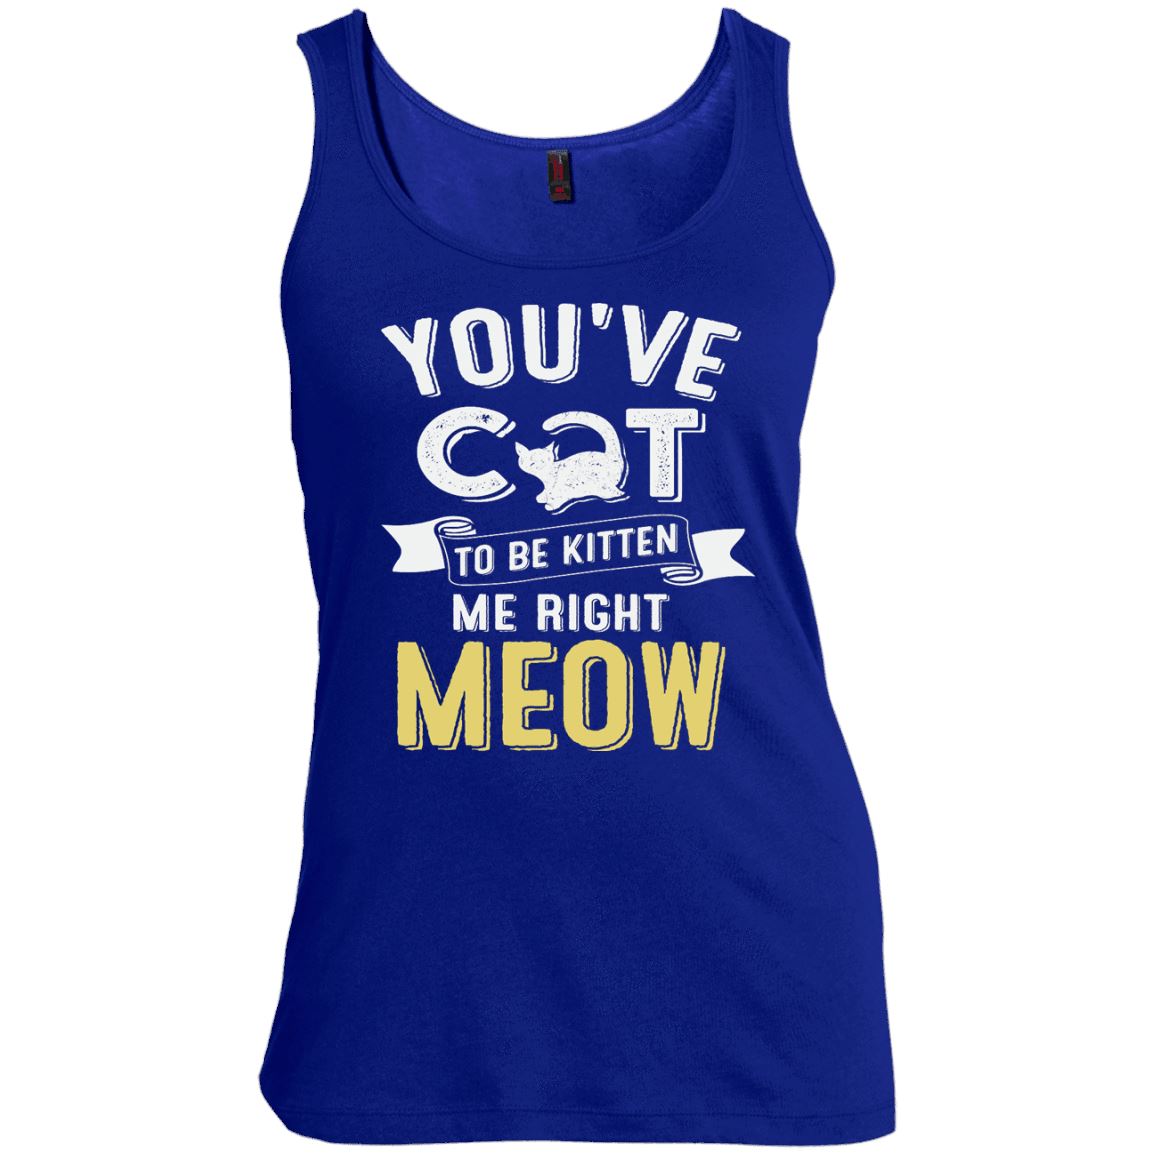 Cat Tee - You've Cat To Be Kitten Me Right Meow - CatsForLife